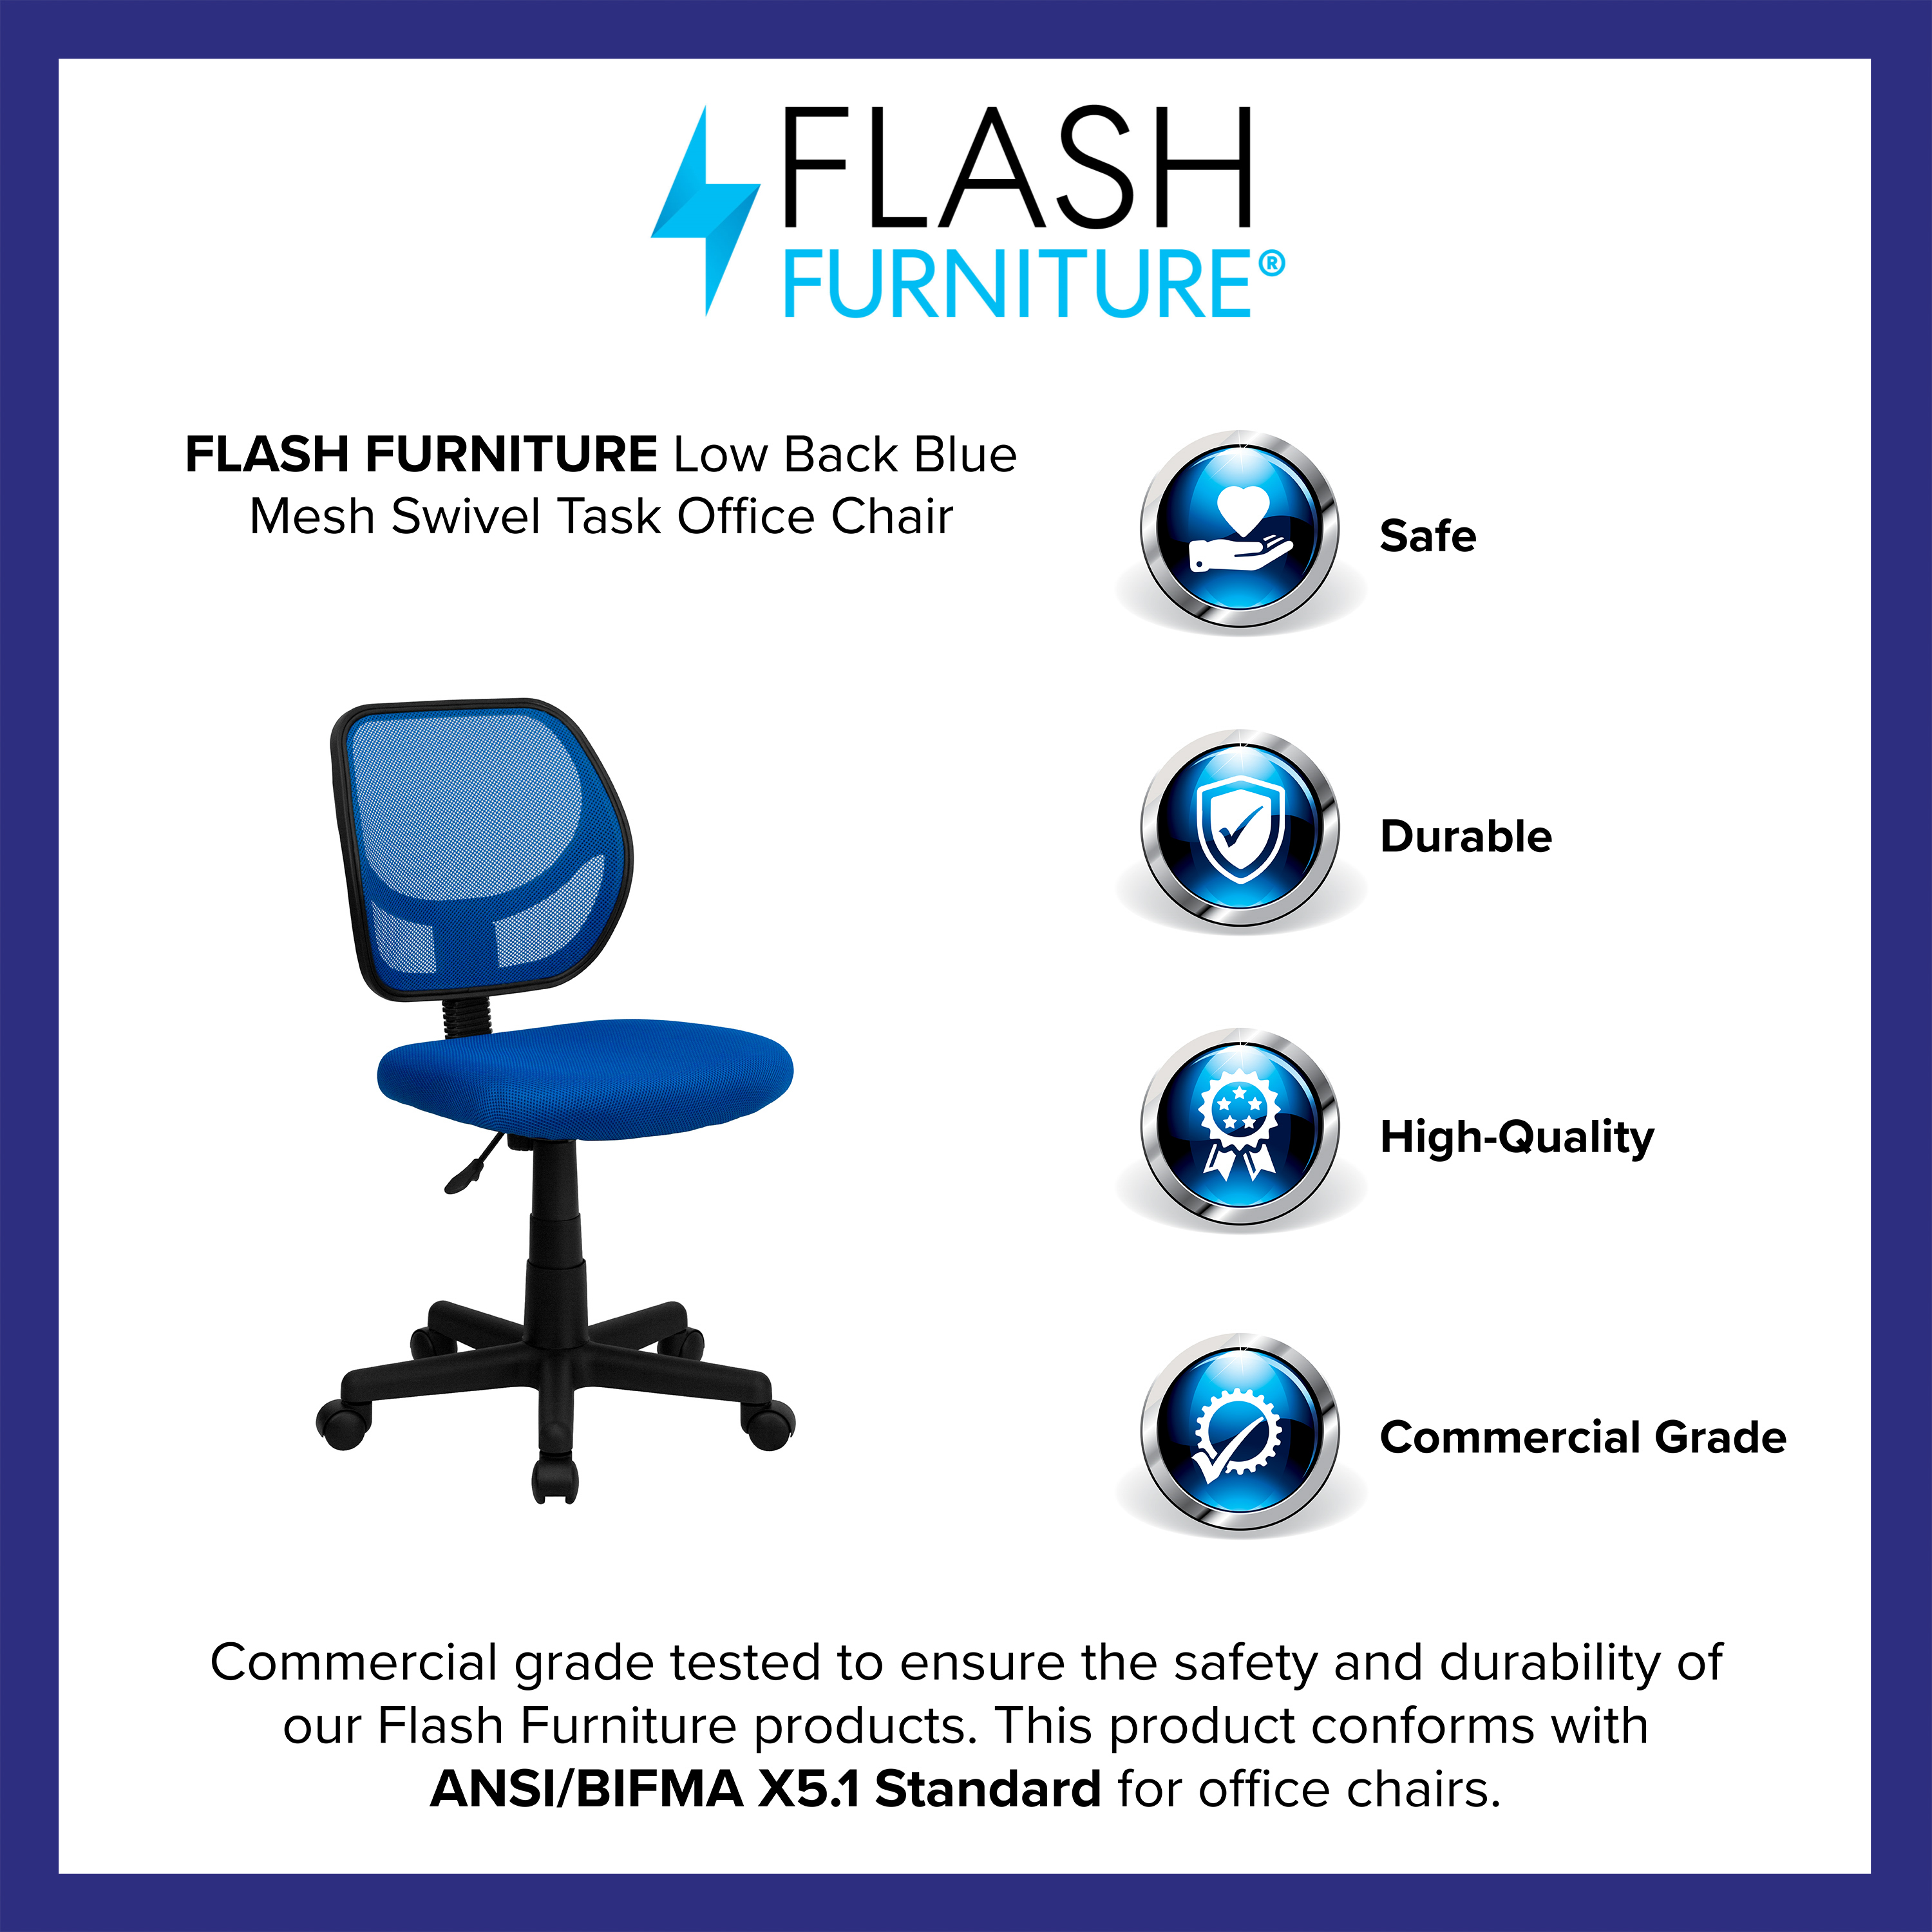 Flash Furniture Low Back Blue Mesh Swivel Task Office Chair - image 5 of 14